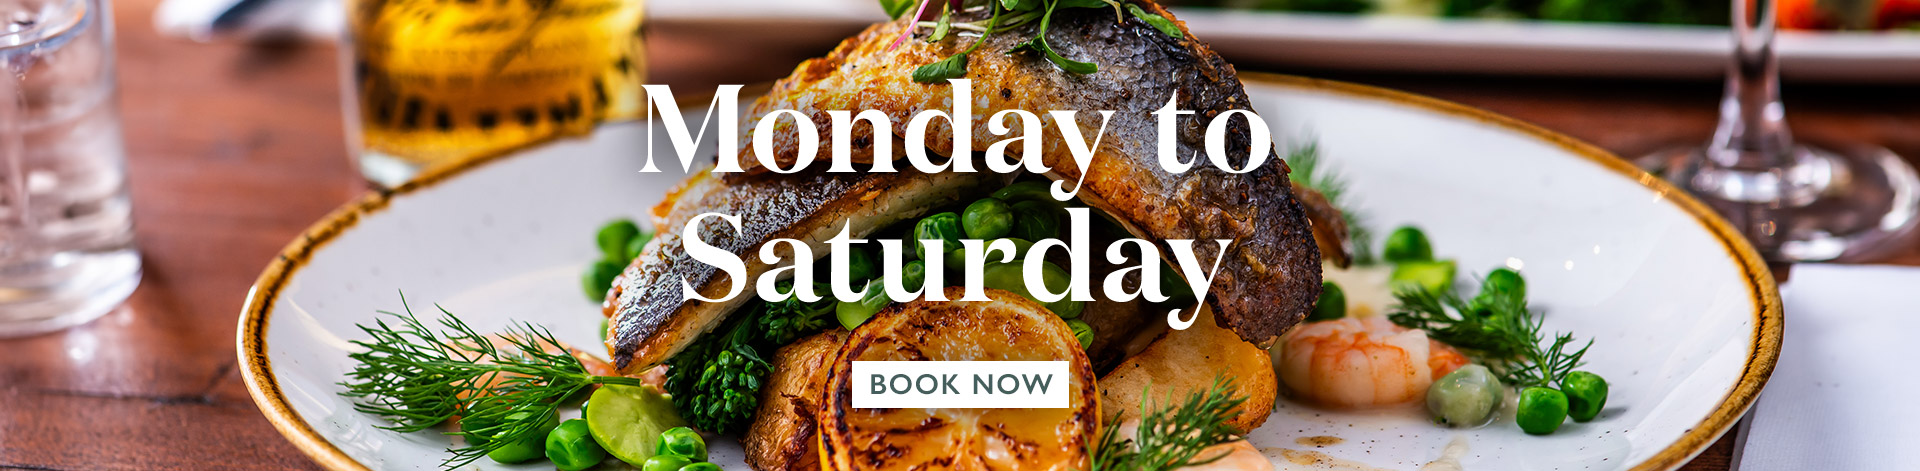 Book now at The Thatched House